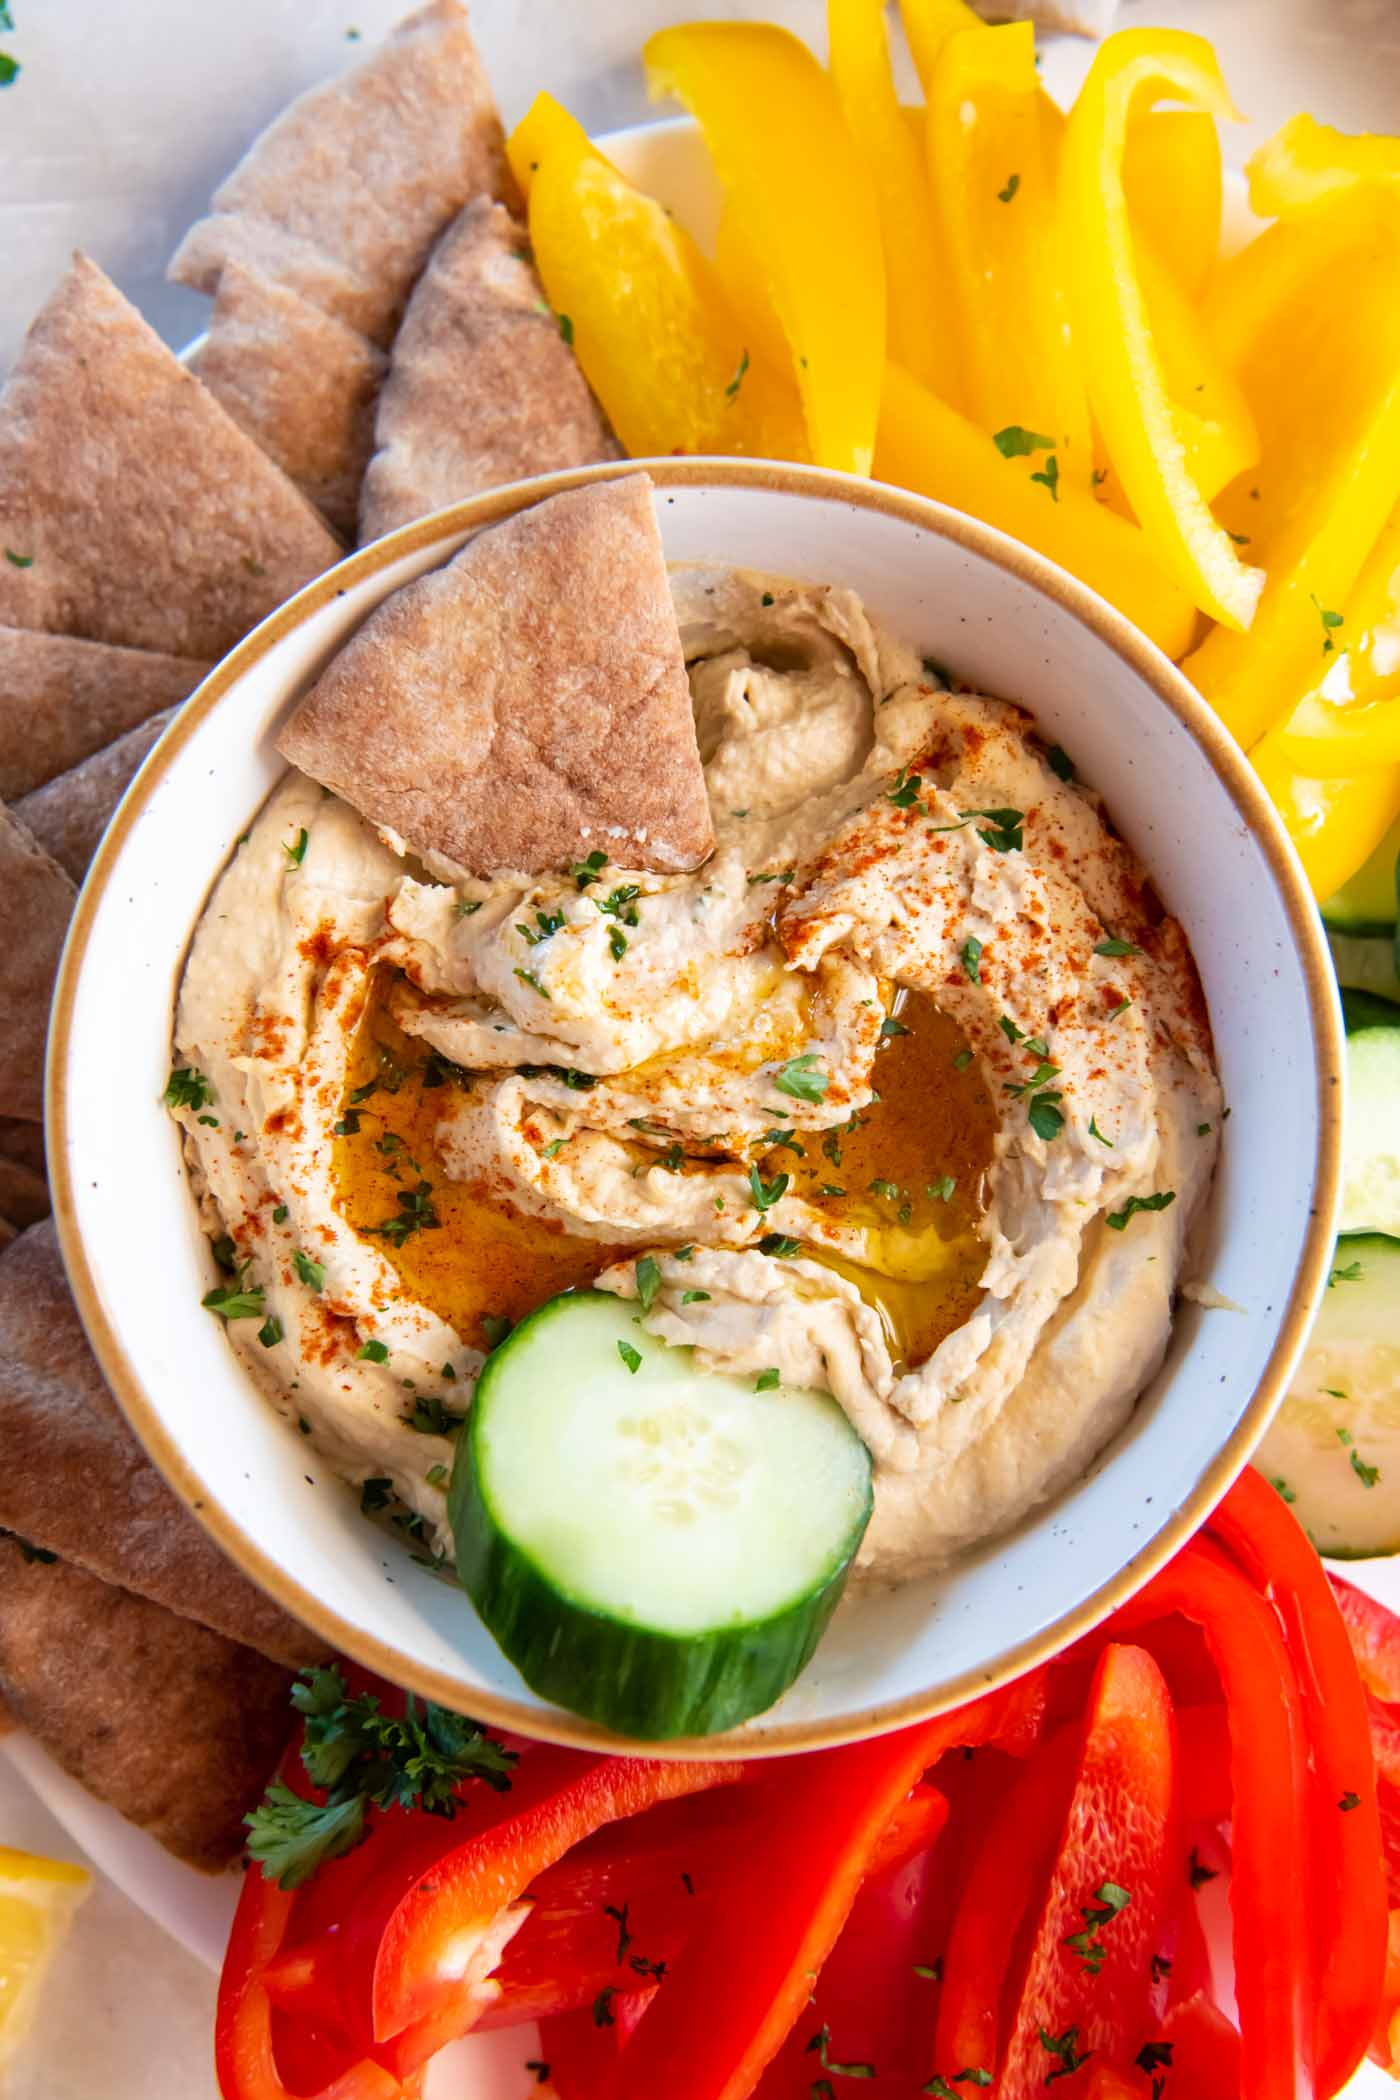 Bowl of hummus with pita bread triangle and cucumber slice in it, with cut vegetables and pita bread around the bowl.